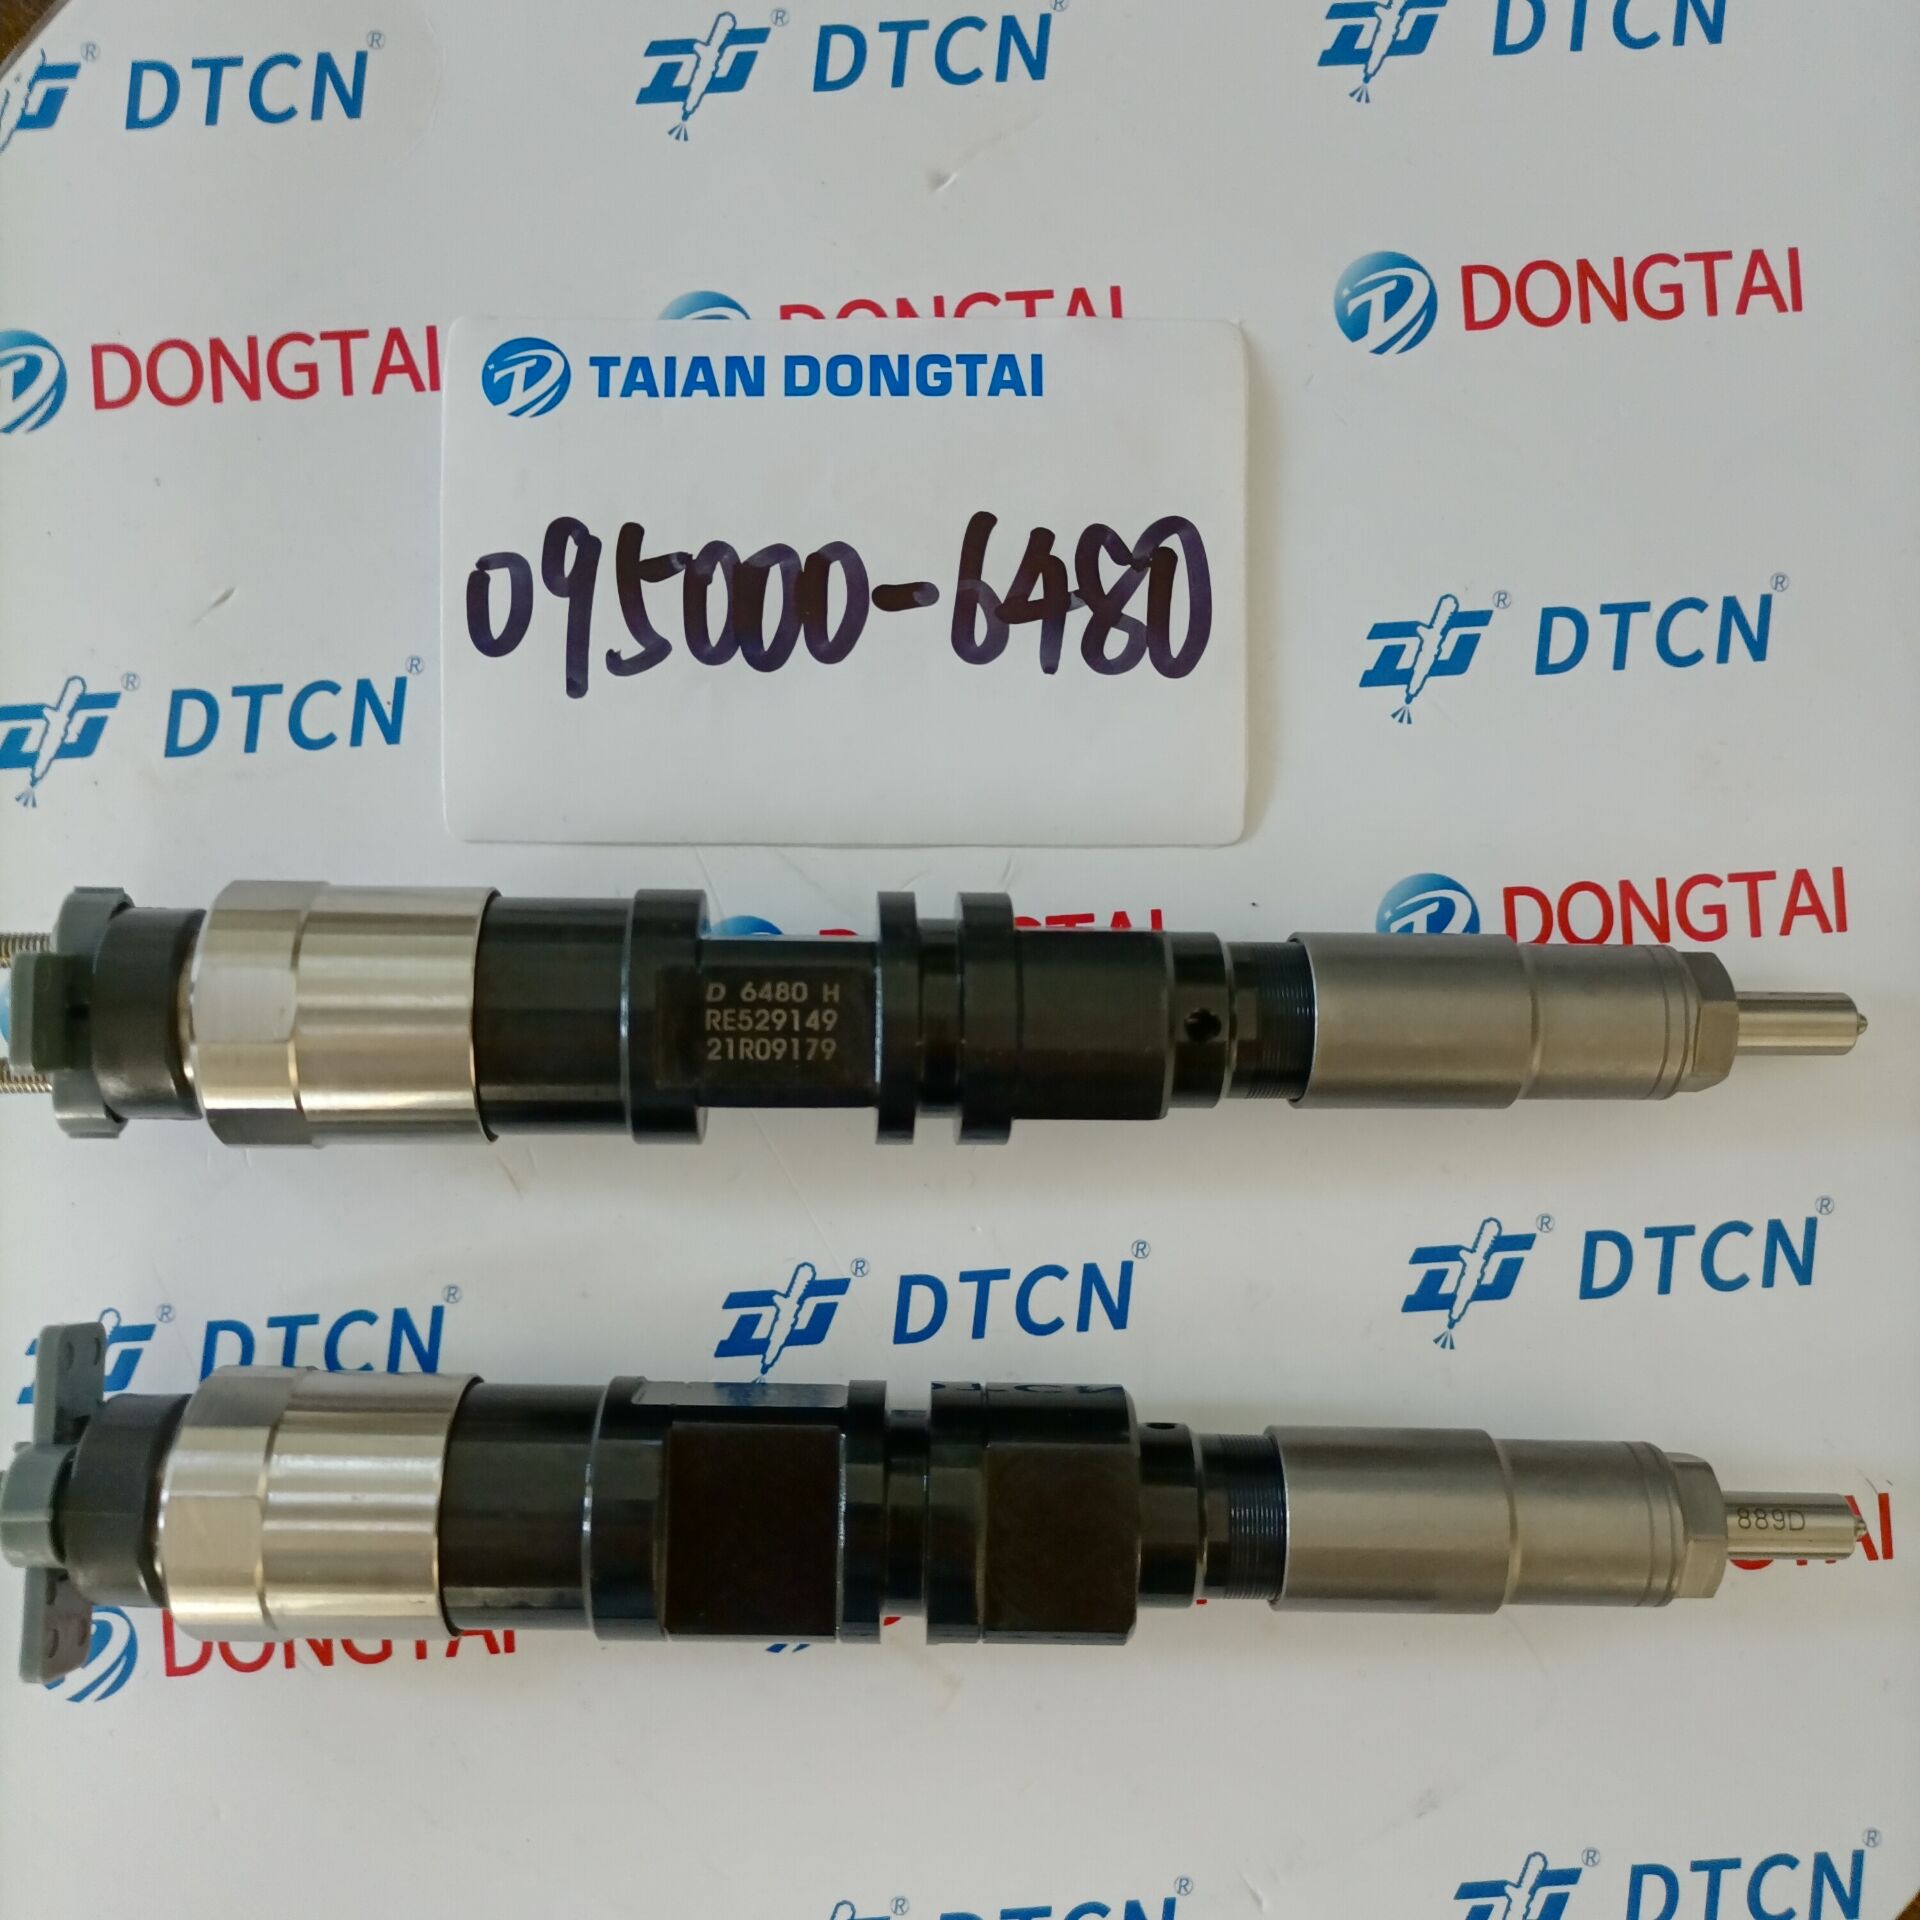 Best Price for Dt L950 Wheel Loader - Denso Common Rail Injector 095000-6480  for JOHN DEERE  – Dongtai